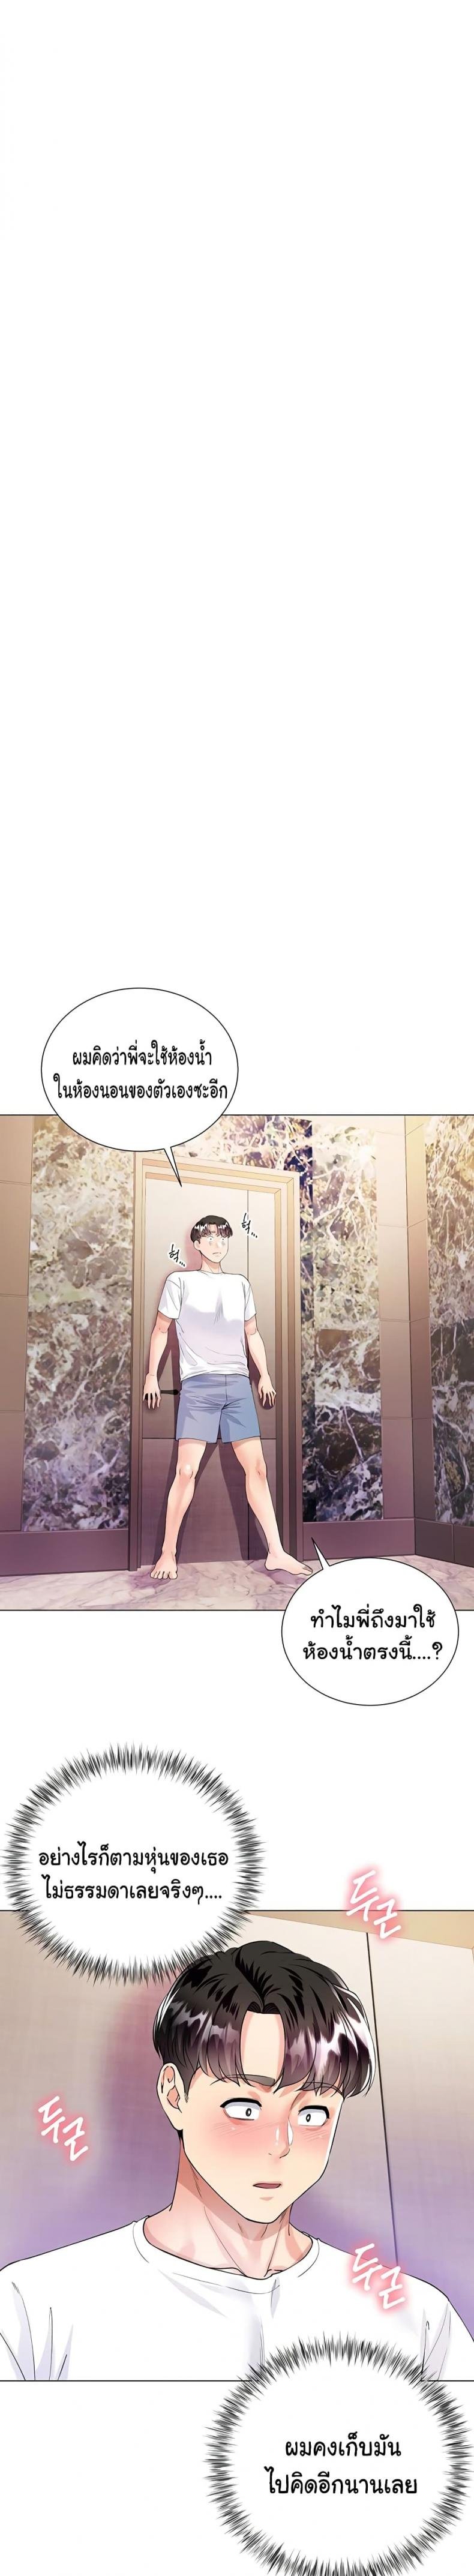 My Sister-in-law’s Skirt 1 ภาพที่ 15